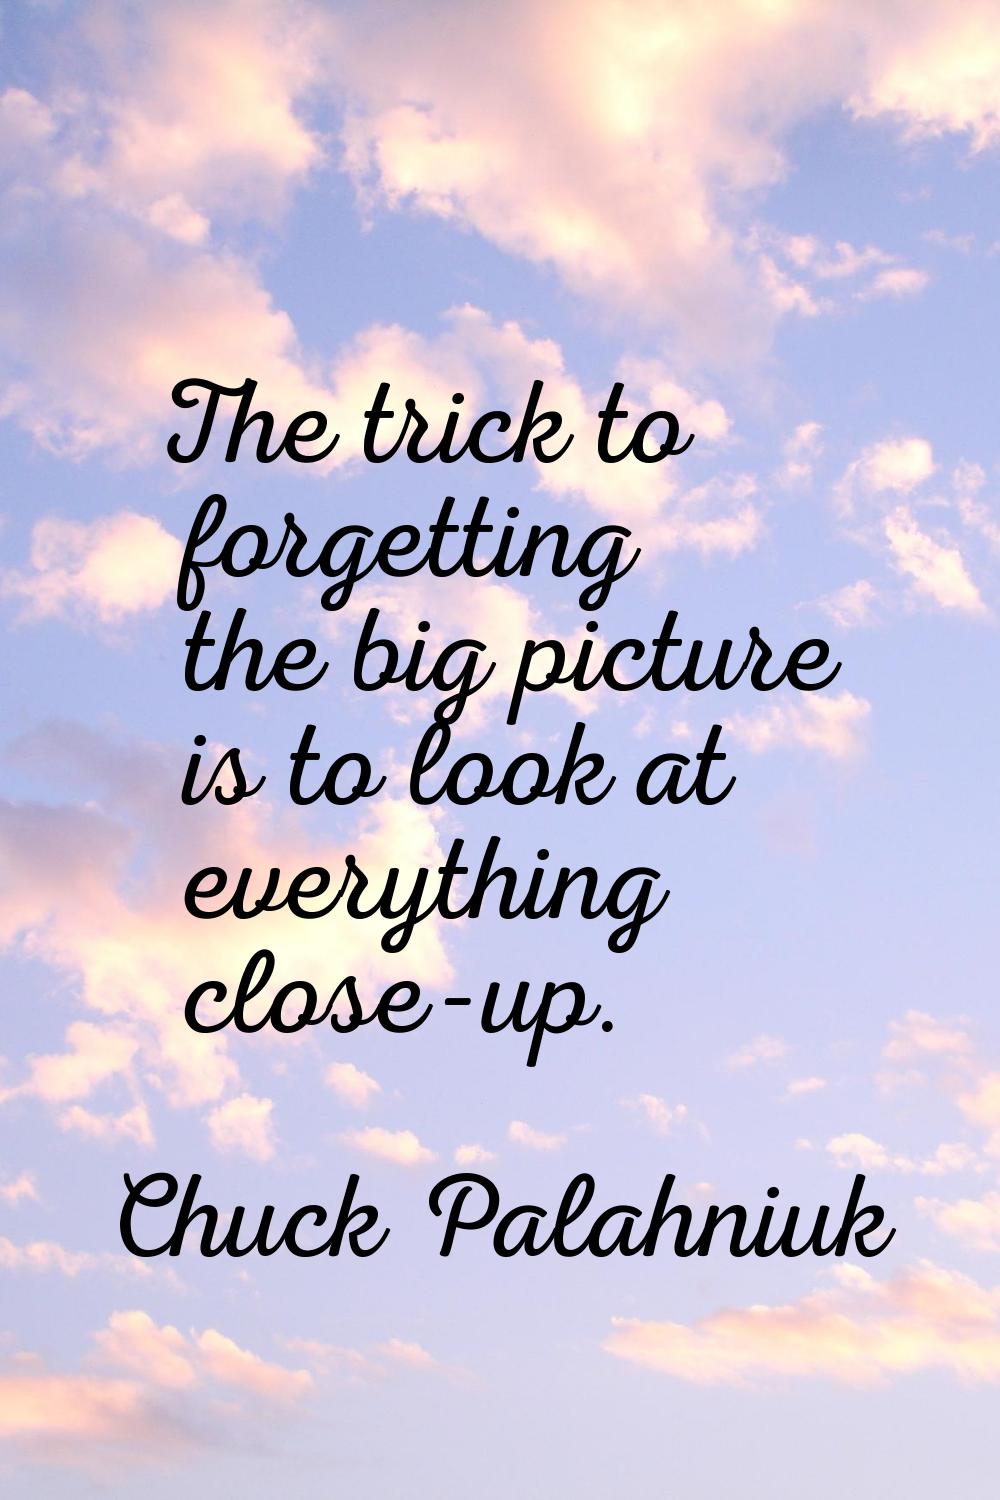 The trick to forgetting the big picture is to look at everything close-up.